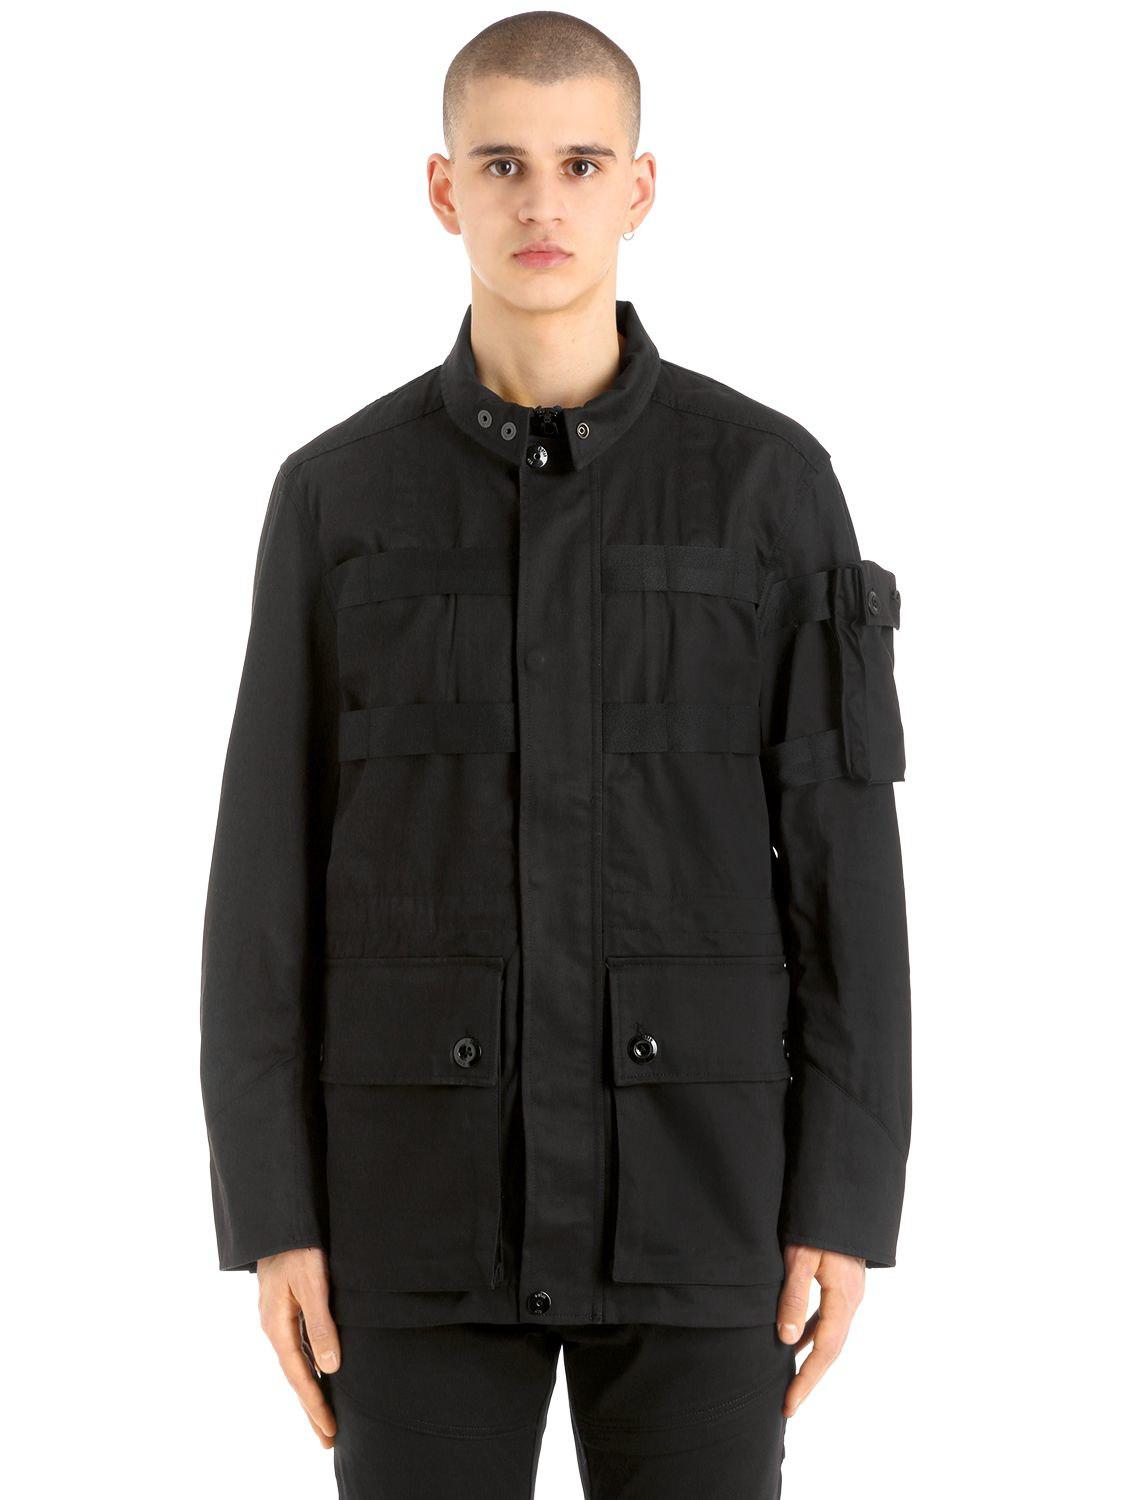 G-Star RAW Ospak Auxilary Components Field Jacket in Black for Men - Lyst